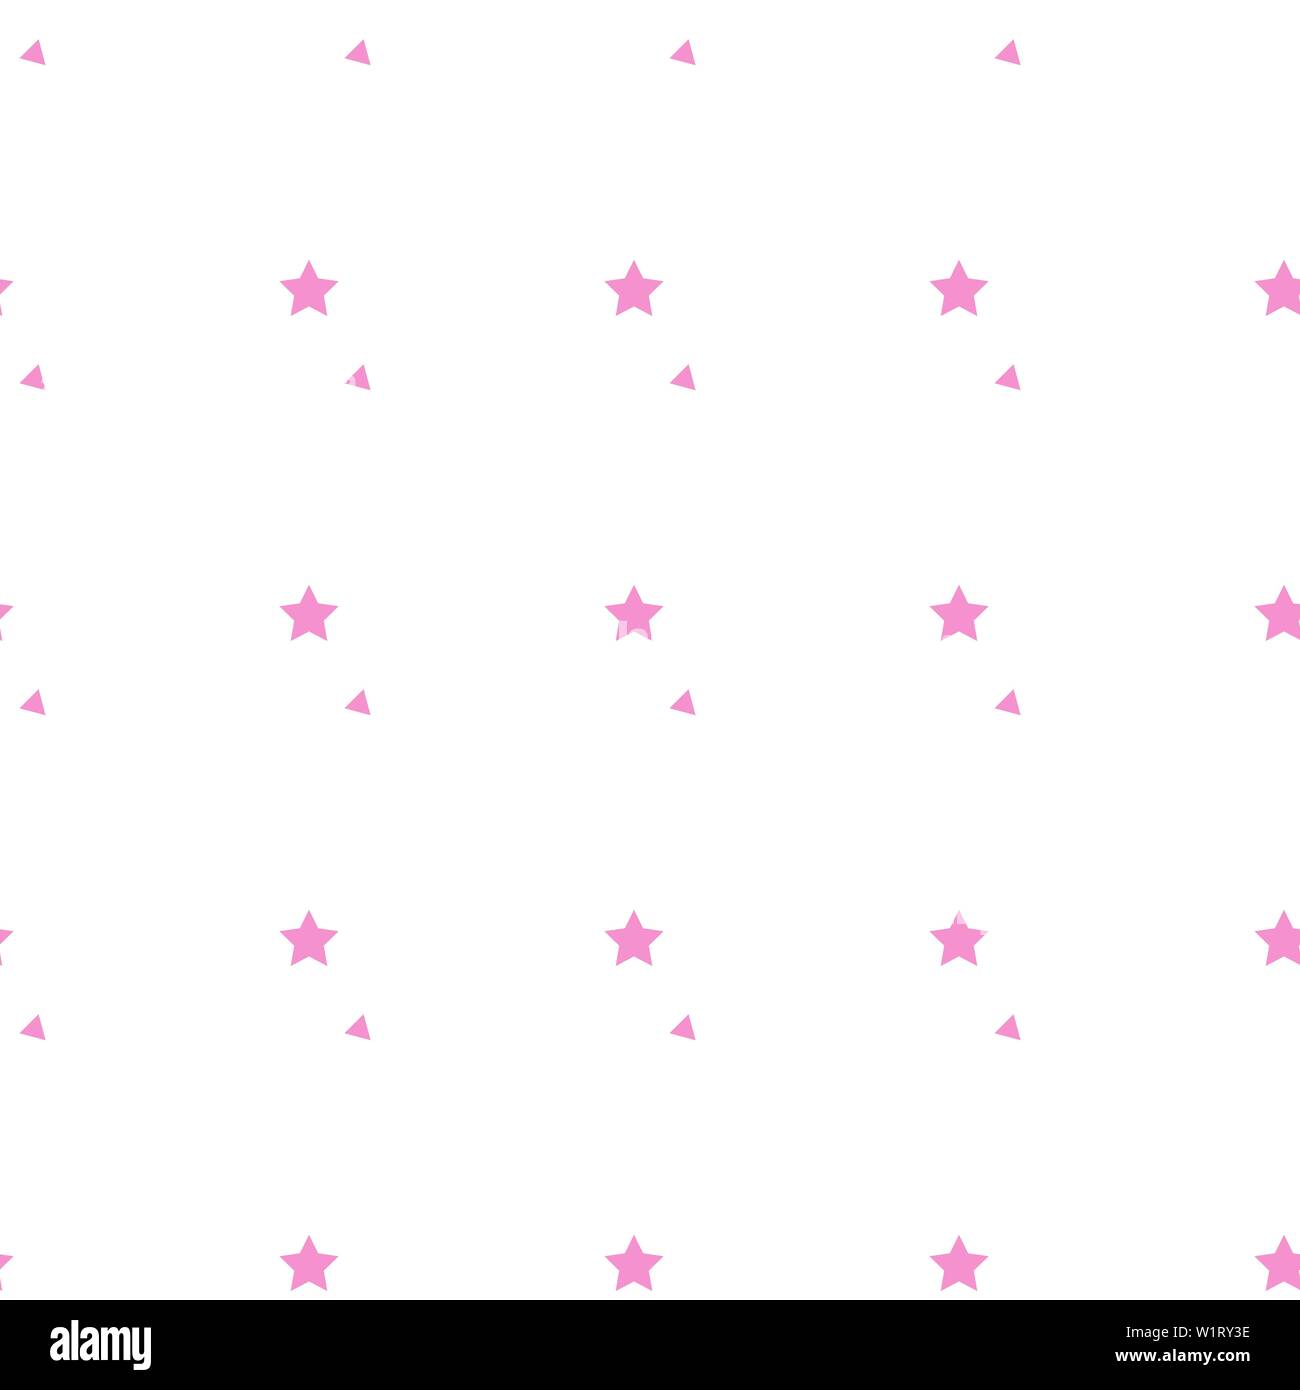 Pink Star Galaxy Flash Background Star Glitter Background Galaxy Background  Background Image And Wallpaper for Free Download